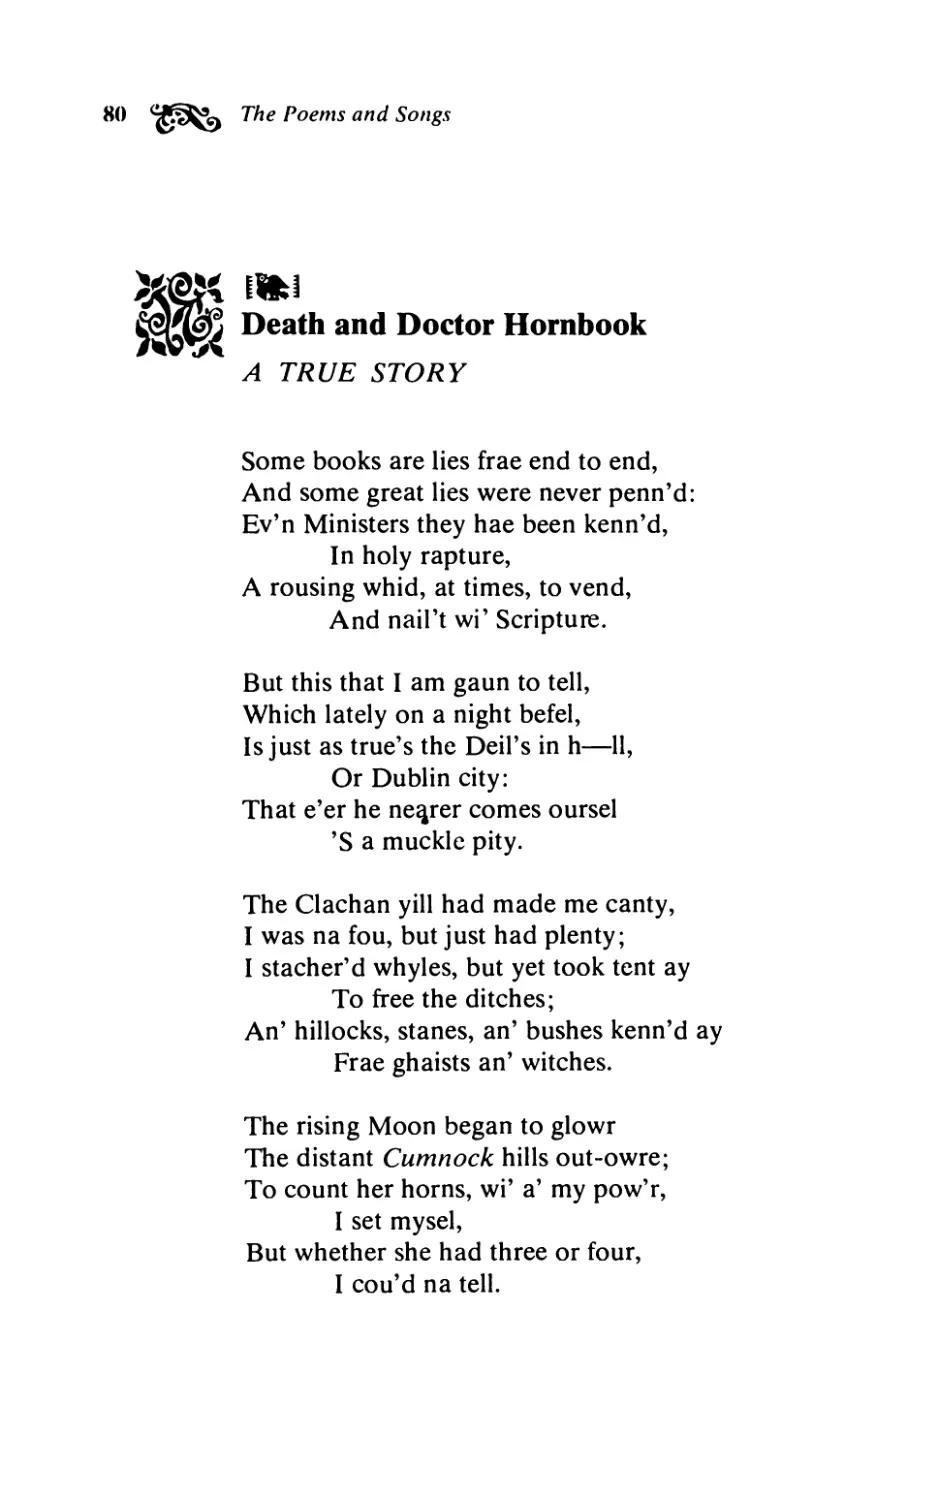 Death and Doctor Hornbook. A True Story